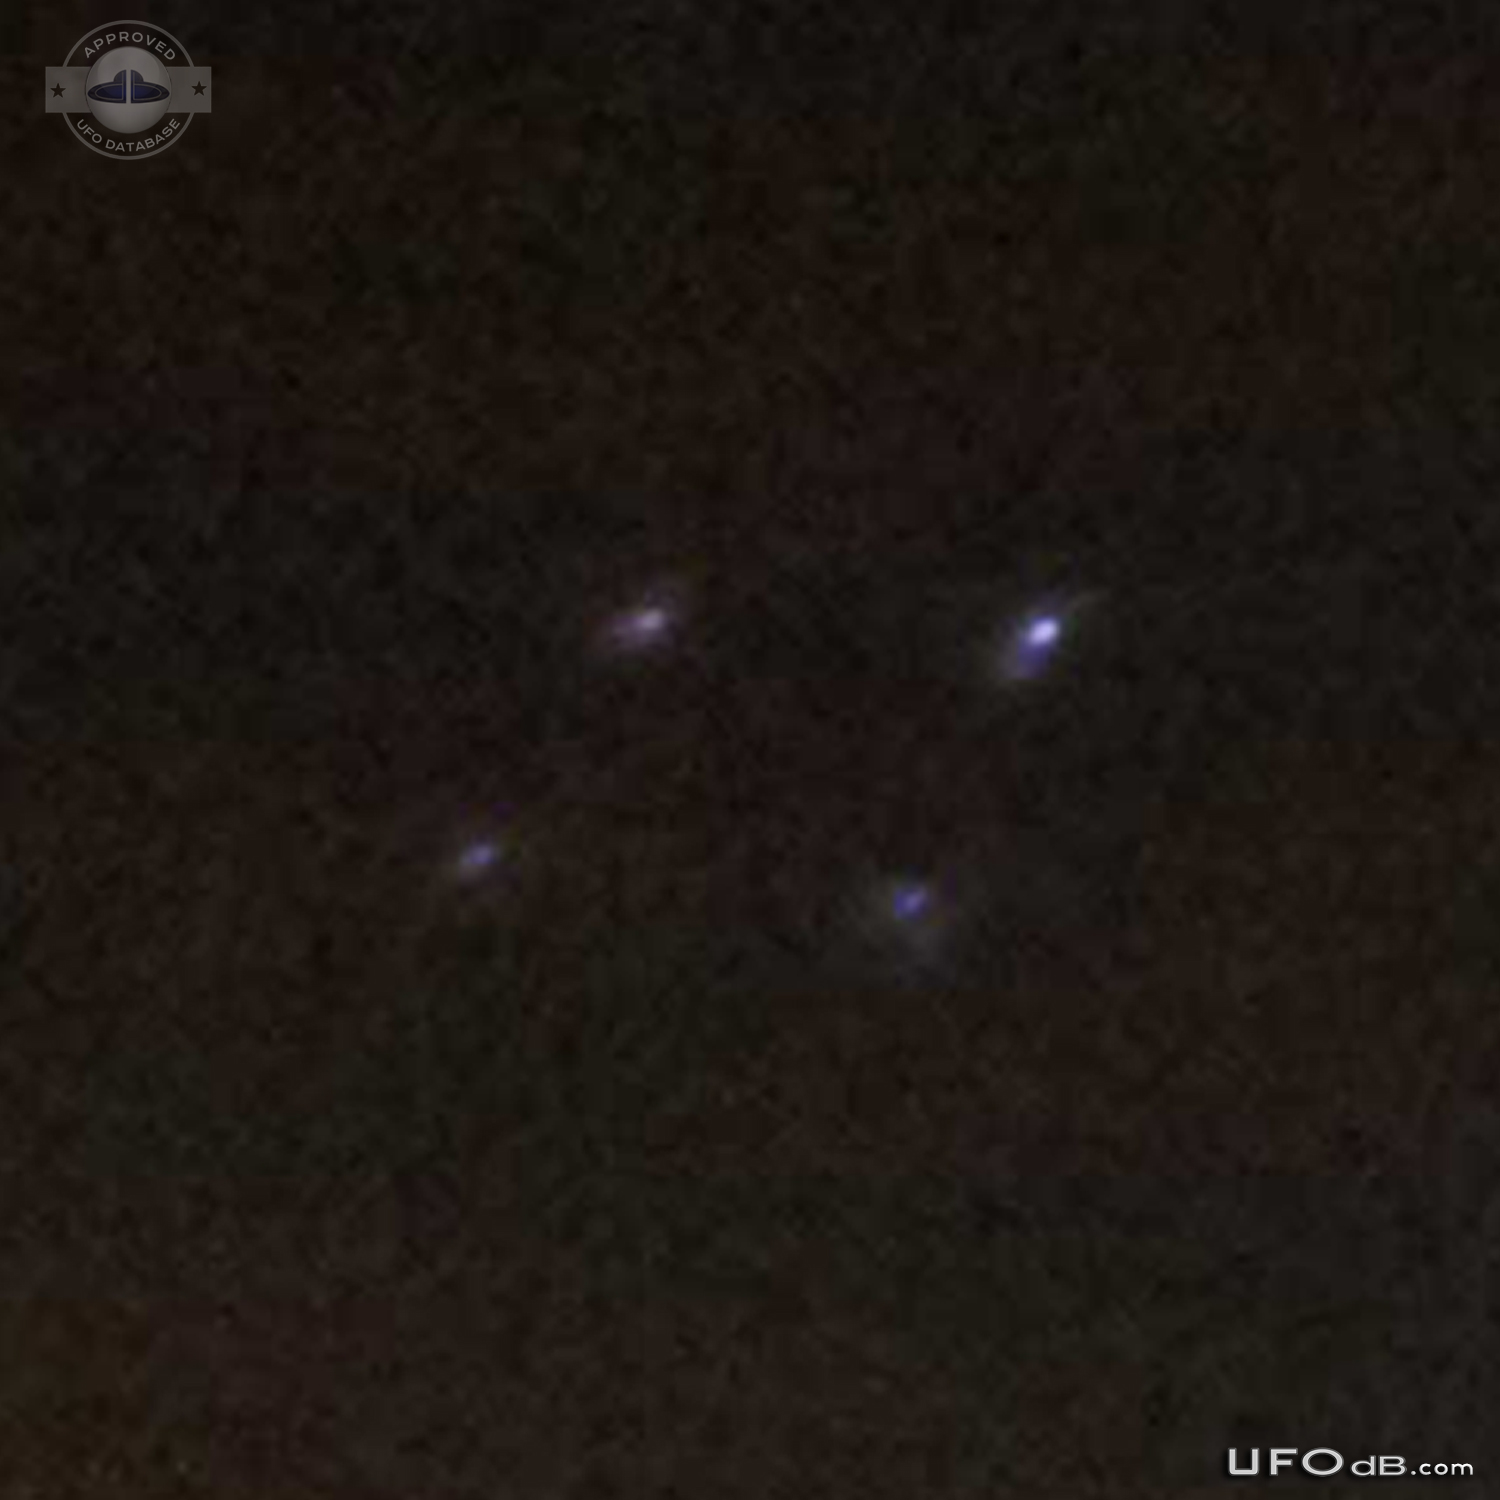 Square shaped UFO caught on picture during heavy rainfall - Rialto CA UFO Picture #384-8